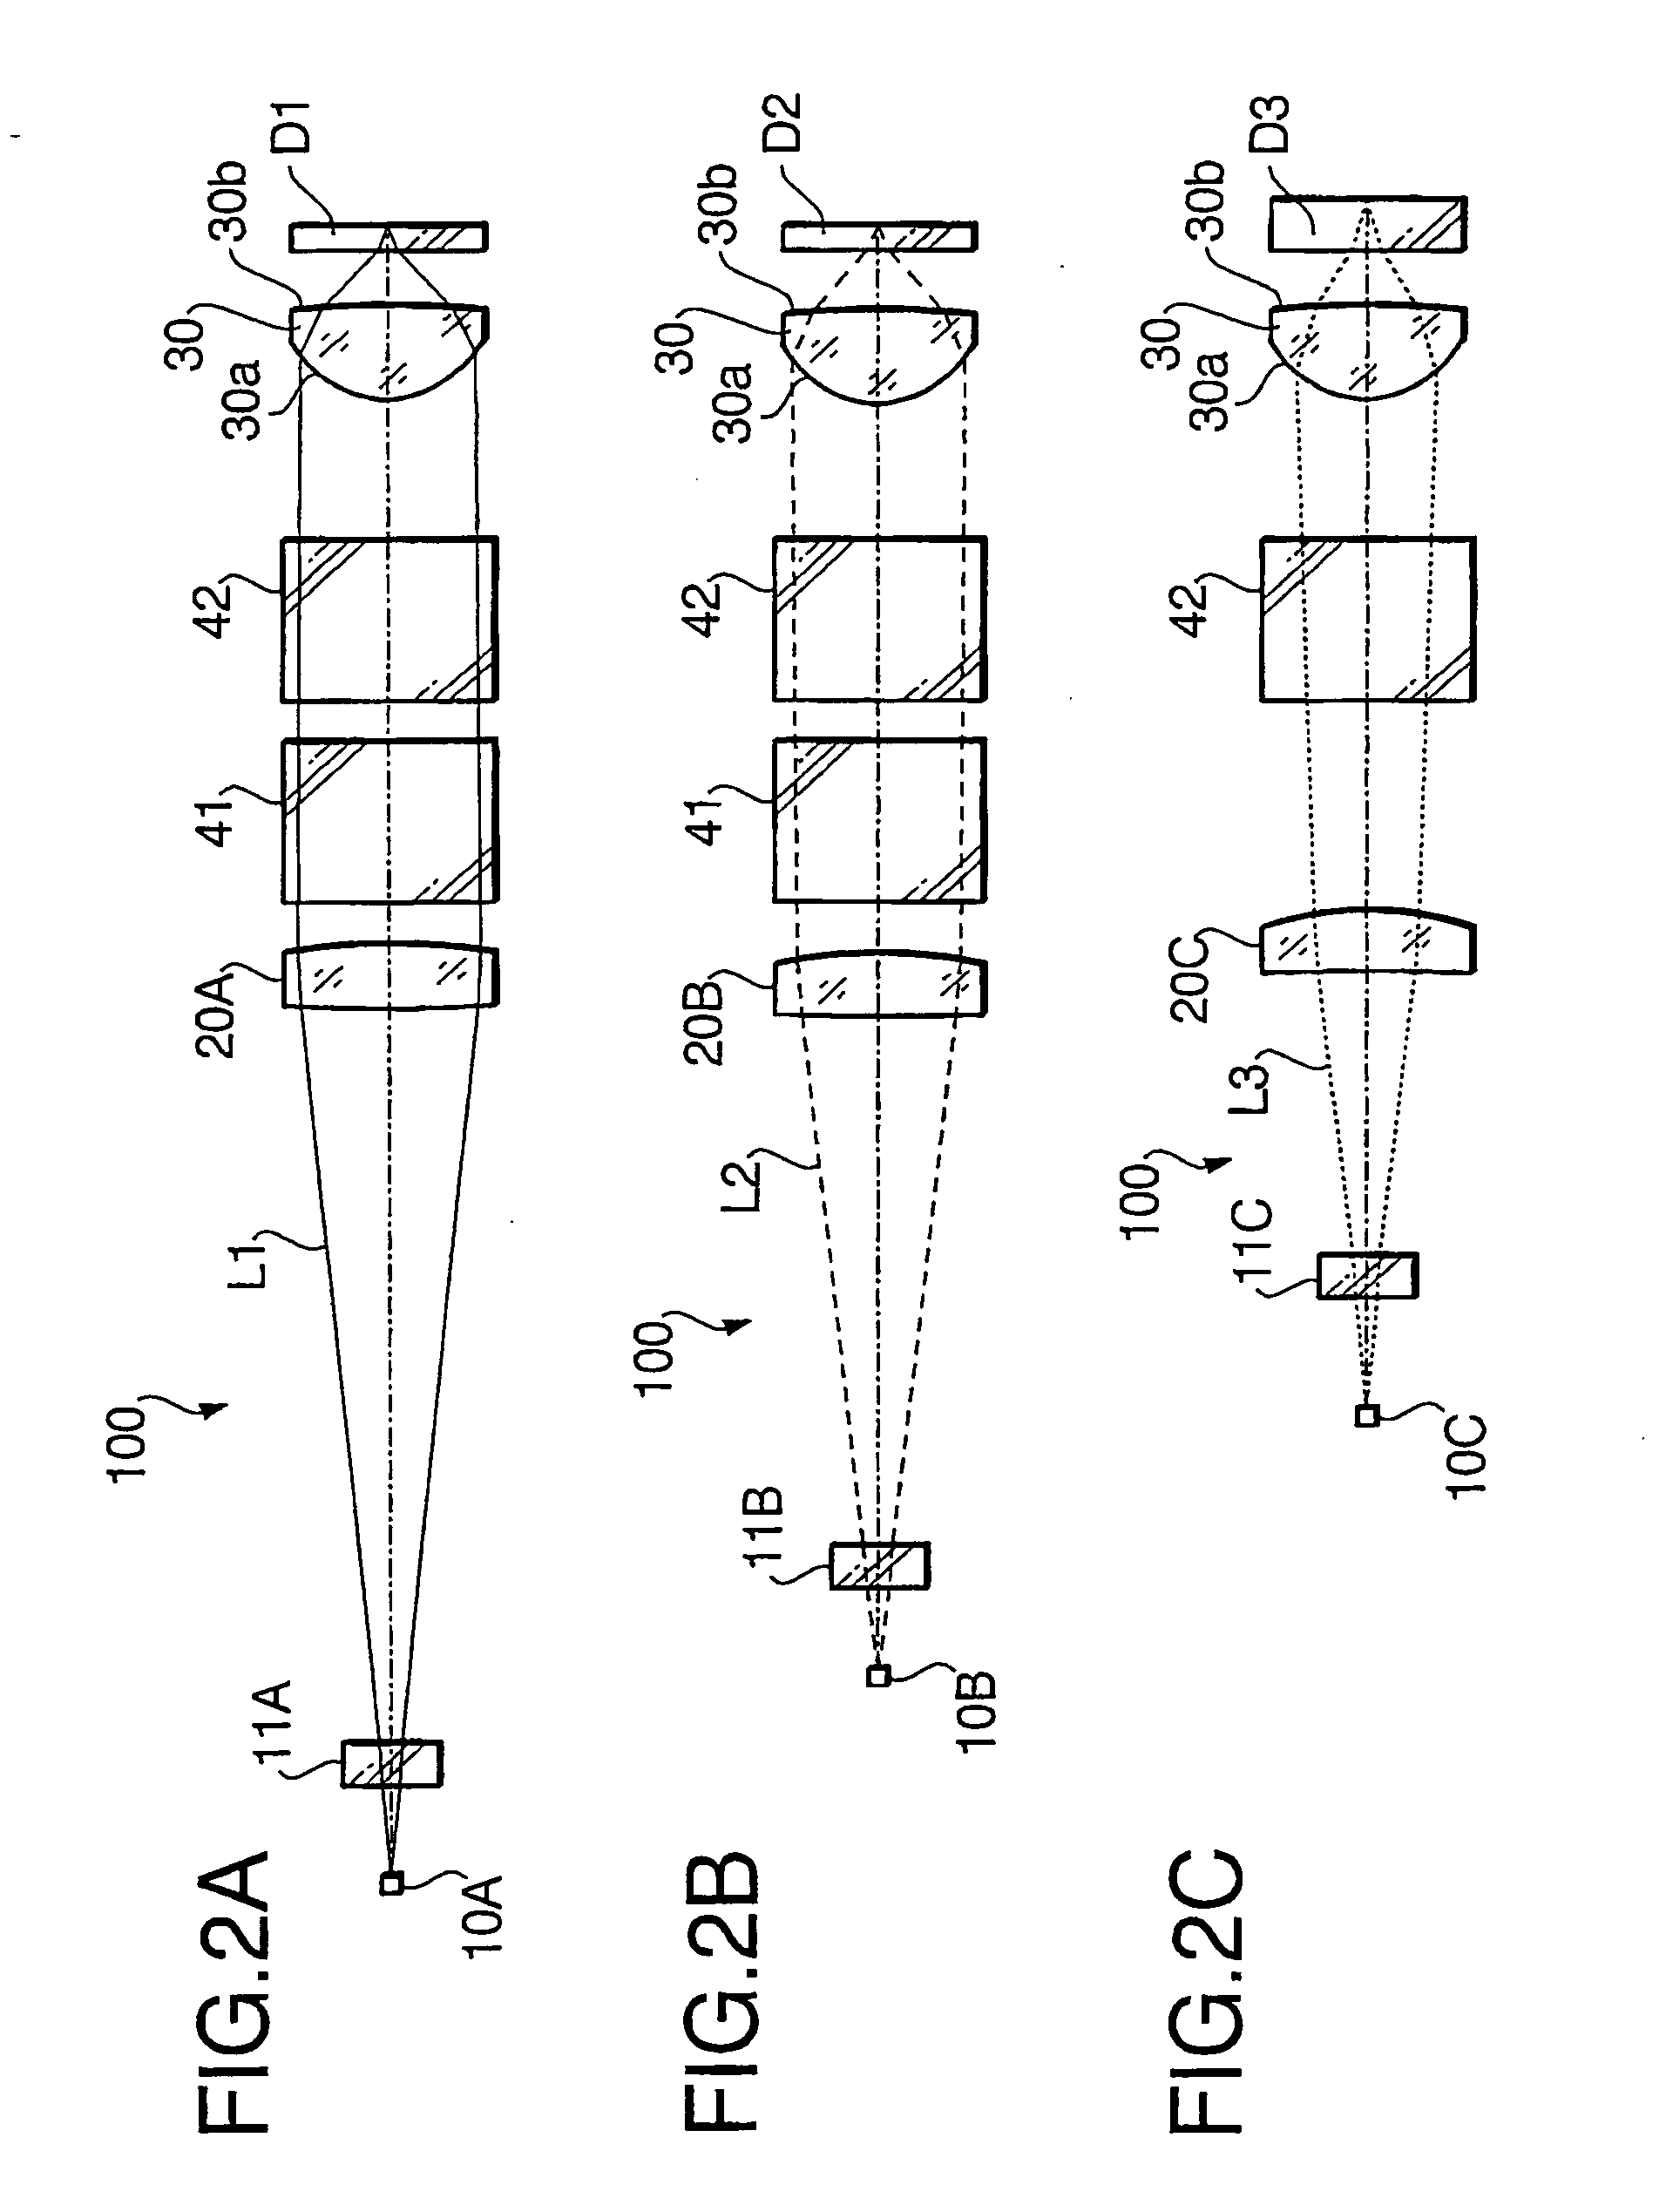 Optical pick-up for optical disc device